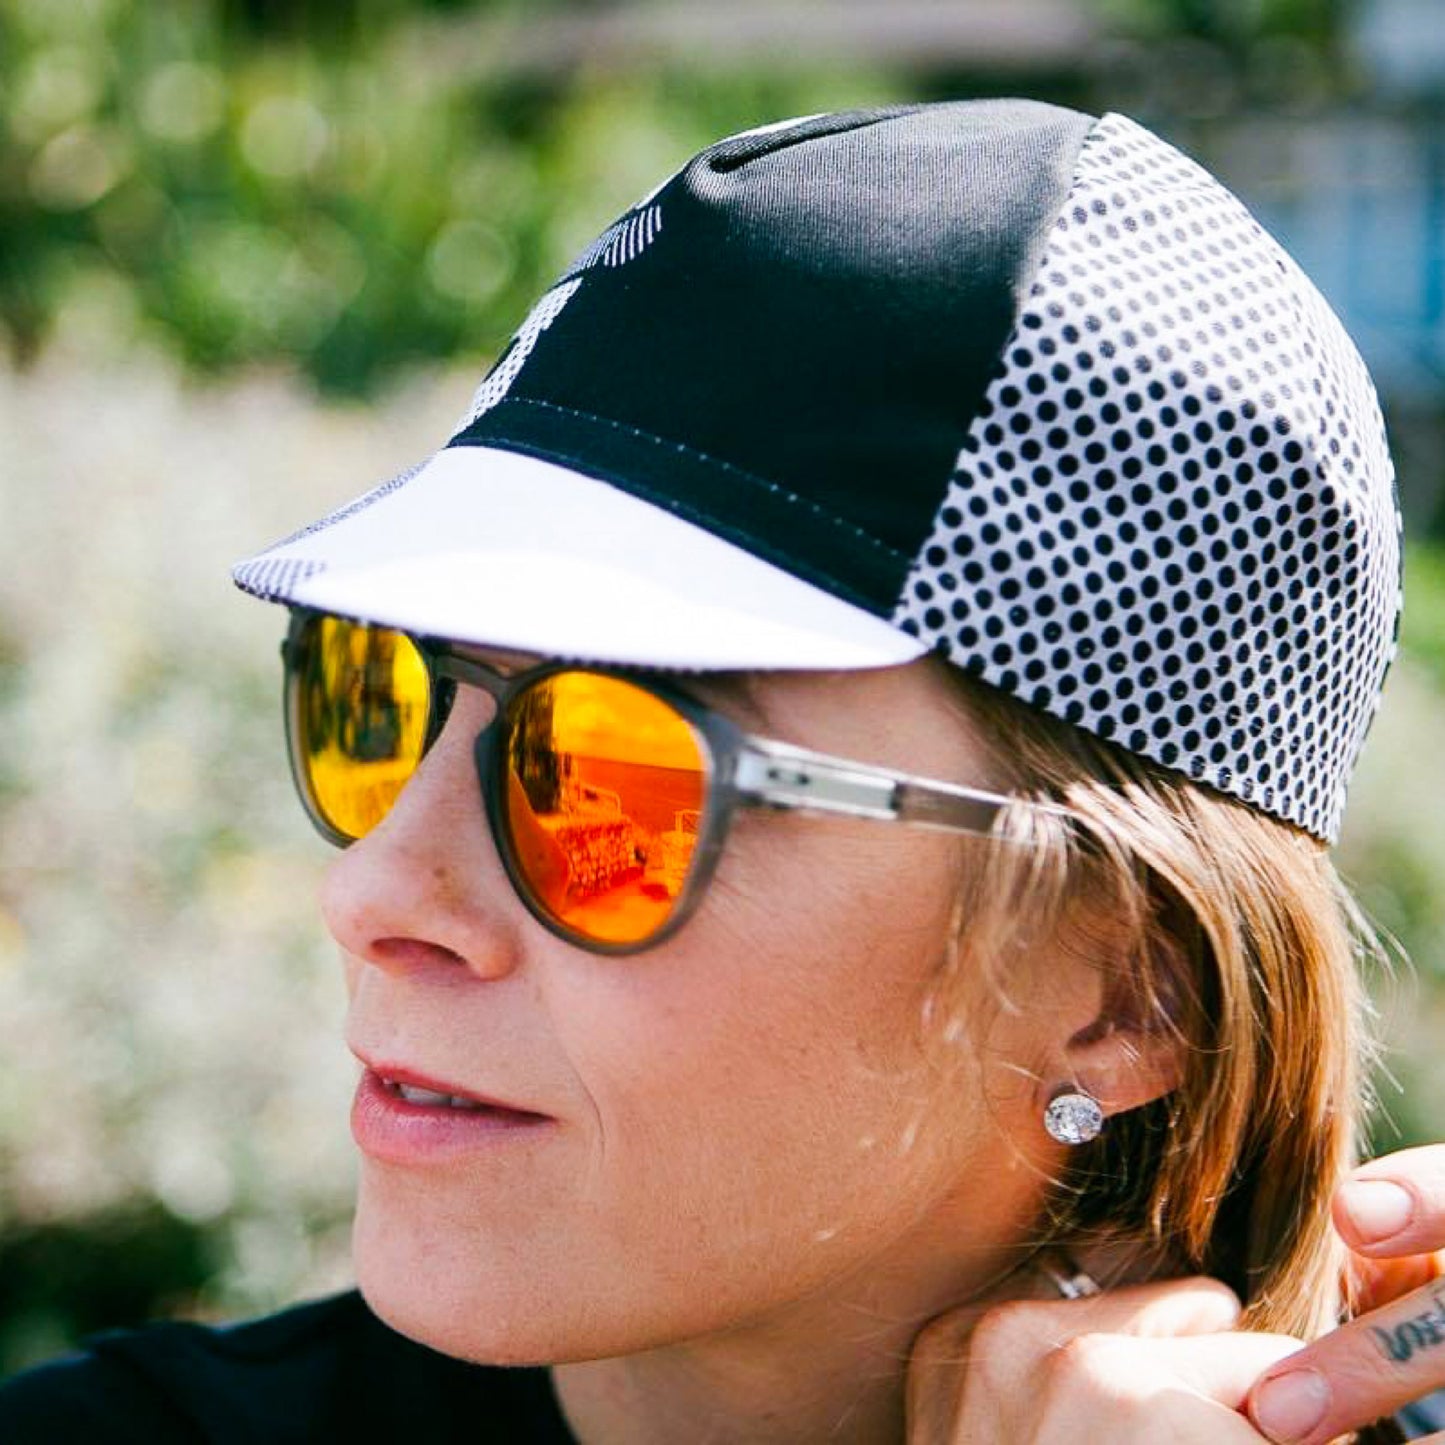 Cinelli Optical Cycling Cap White Available at Ascender Cycling Club Zürich Switzerland Live Front Side View 